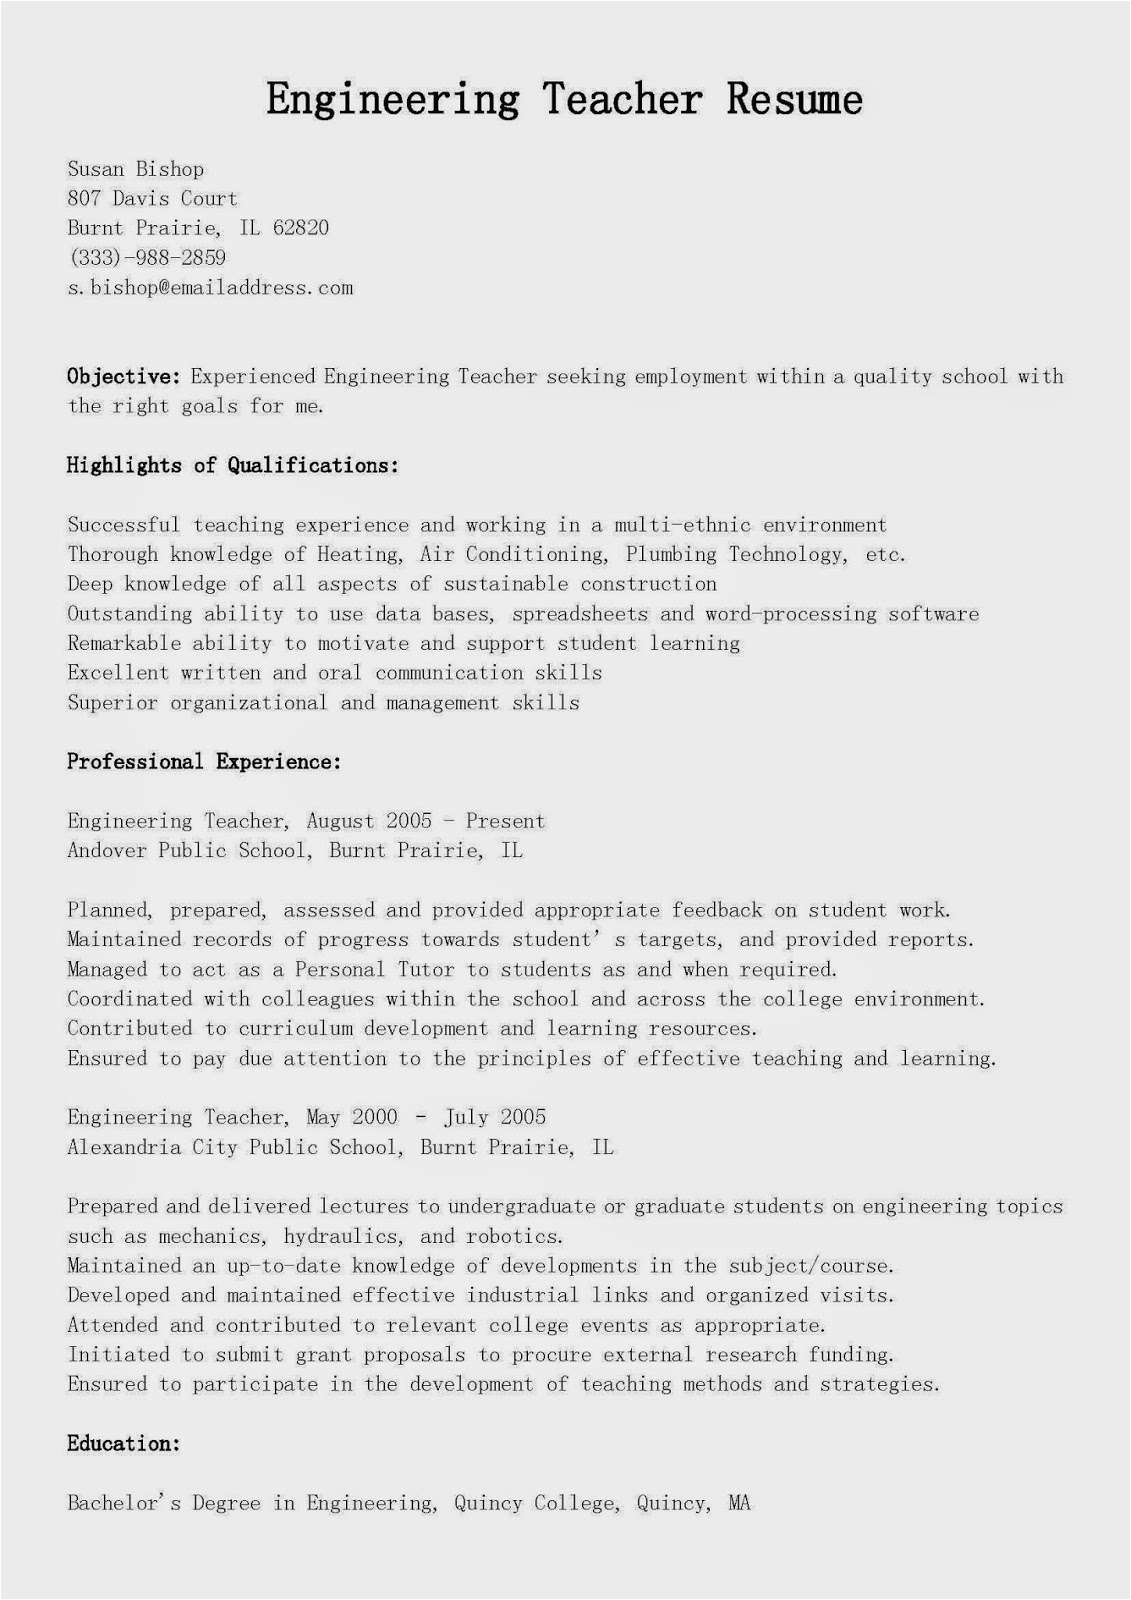 Sample Resume for Lecturer In Engineering College Resume Samples Engineering Teacher Resume Sample